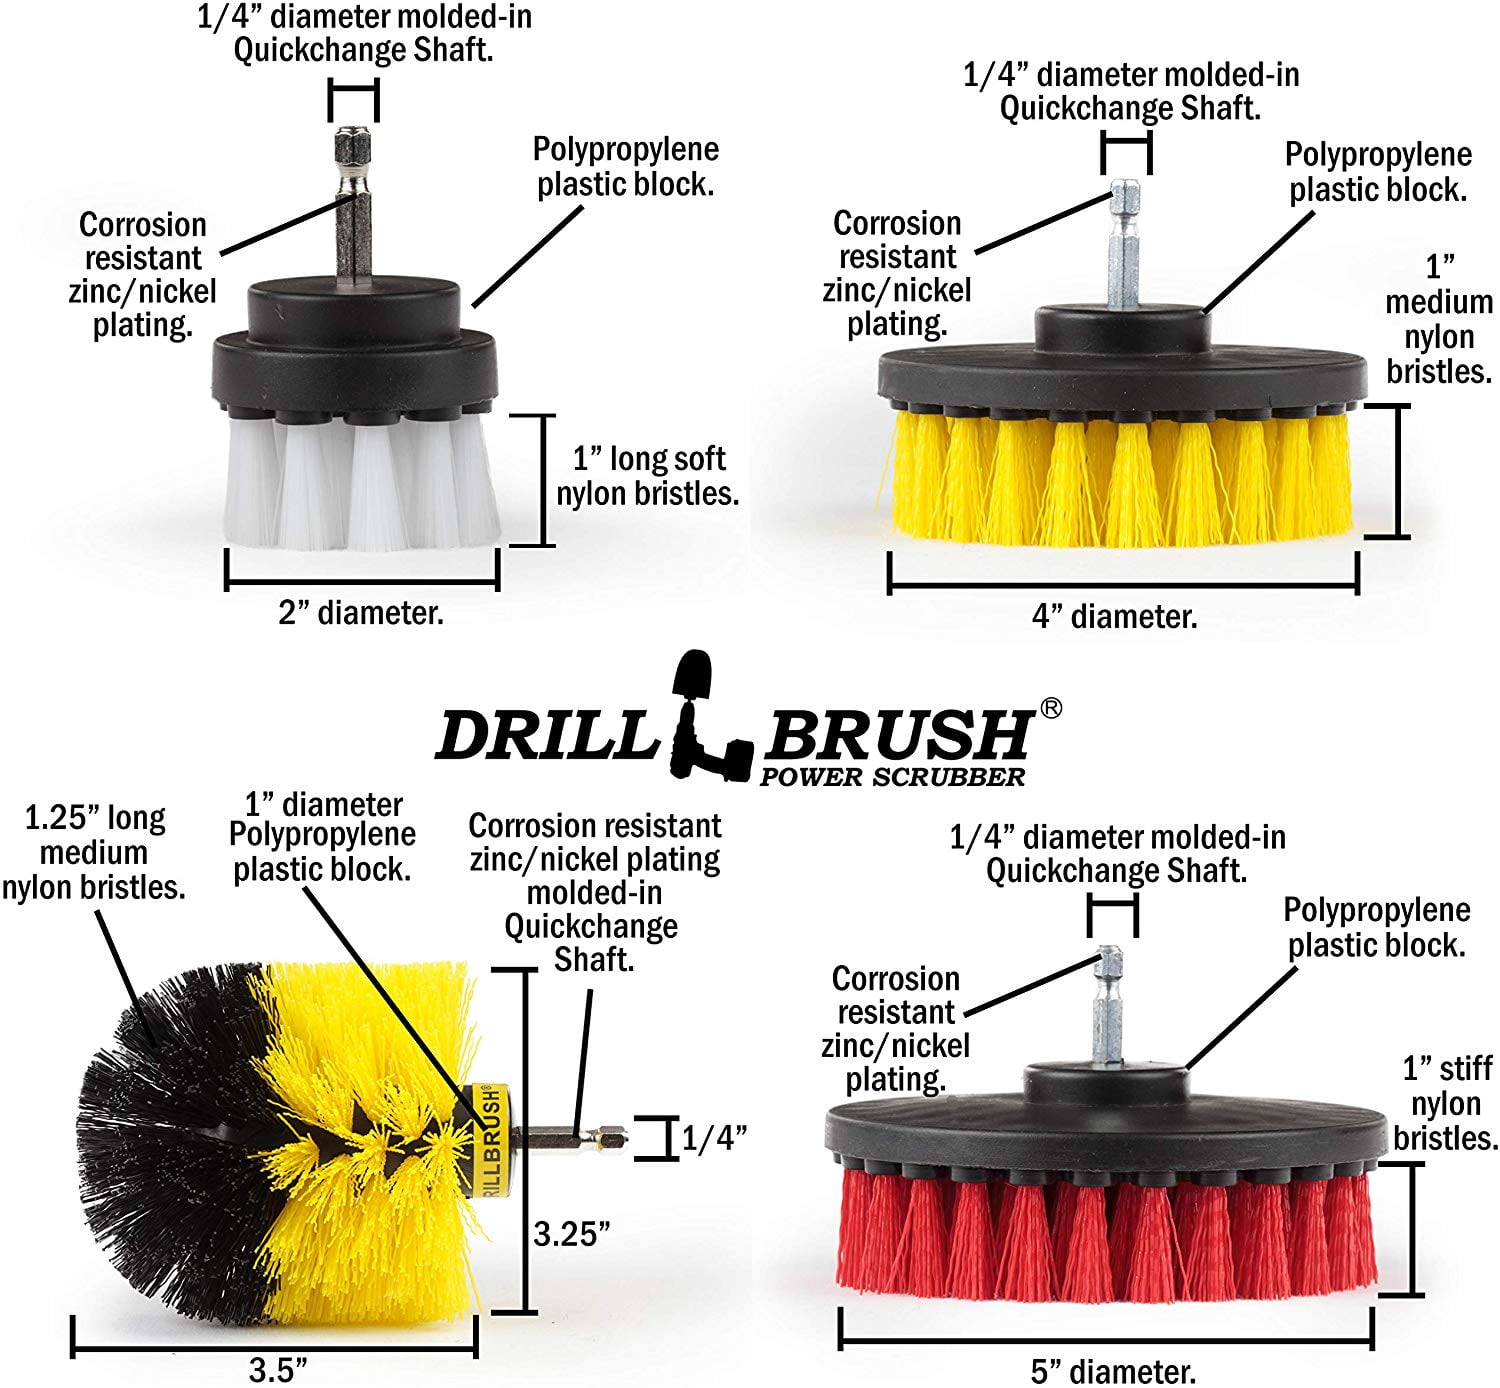 Drillbrush 4pc. Nylon Power Brush Tile & Grout Bathroom Cleaning Scrub  Brush Kit, Power Scrubber Drill Brush Kit, Y-S-542O-QC-DB at Tractor Supply  Co.